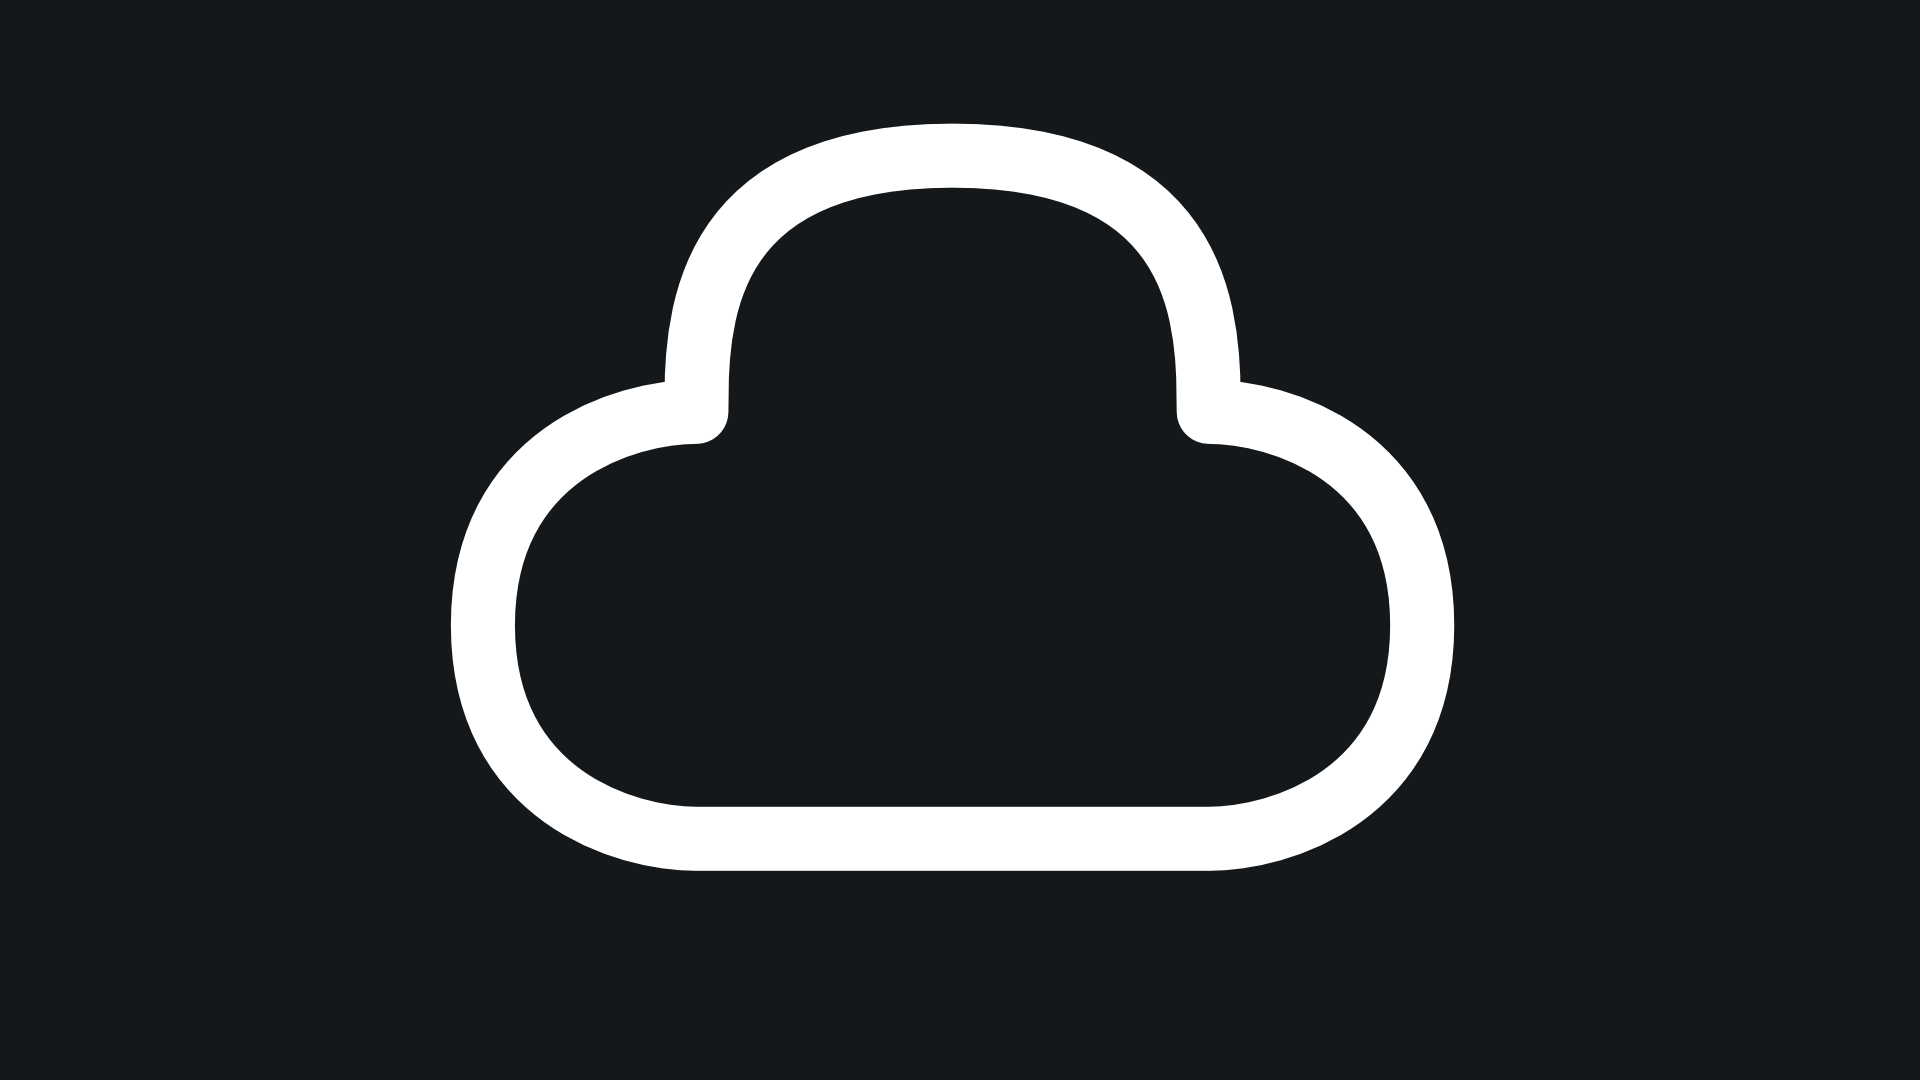 White cloud icon at the center in a black background.